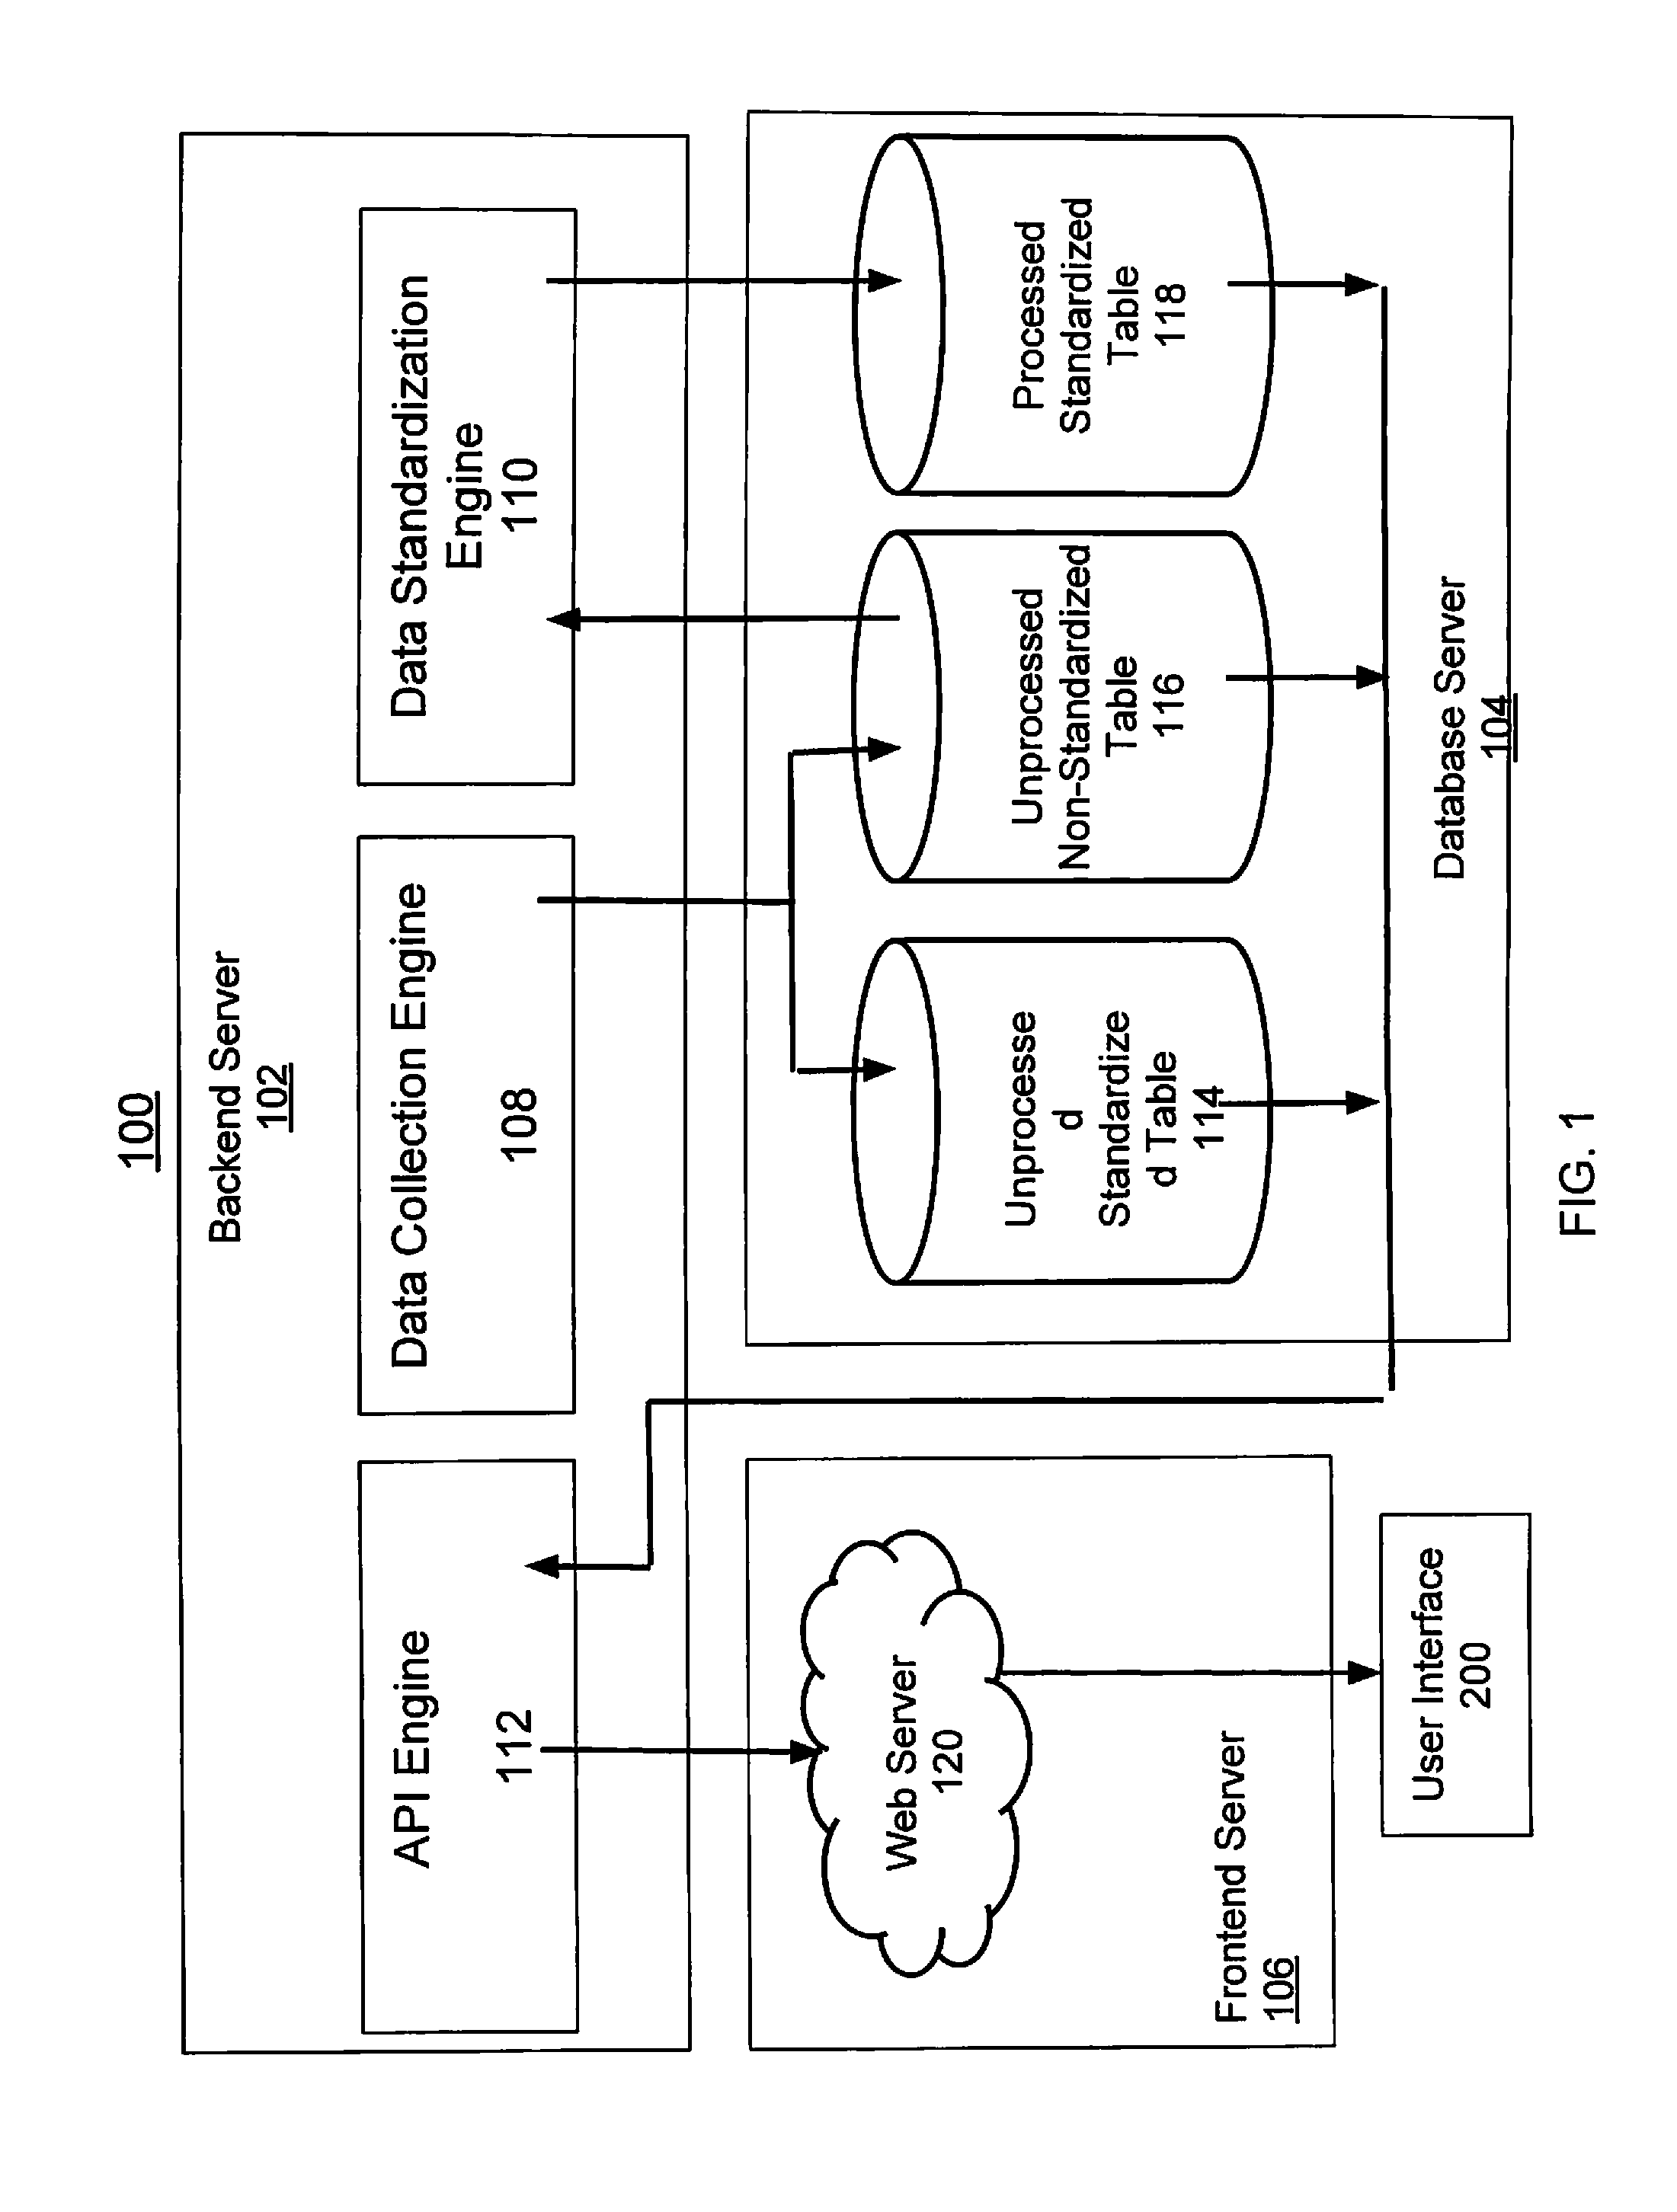 System And Method For Presenting Big Data Through A Web-Based Browser Enabed User Interface